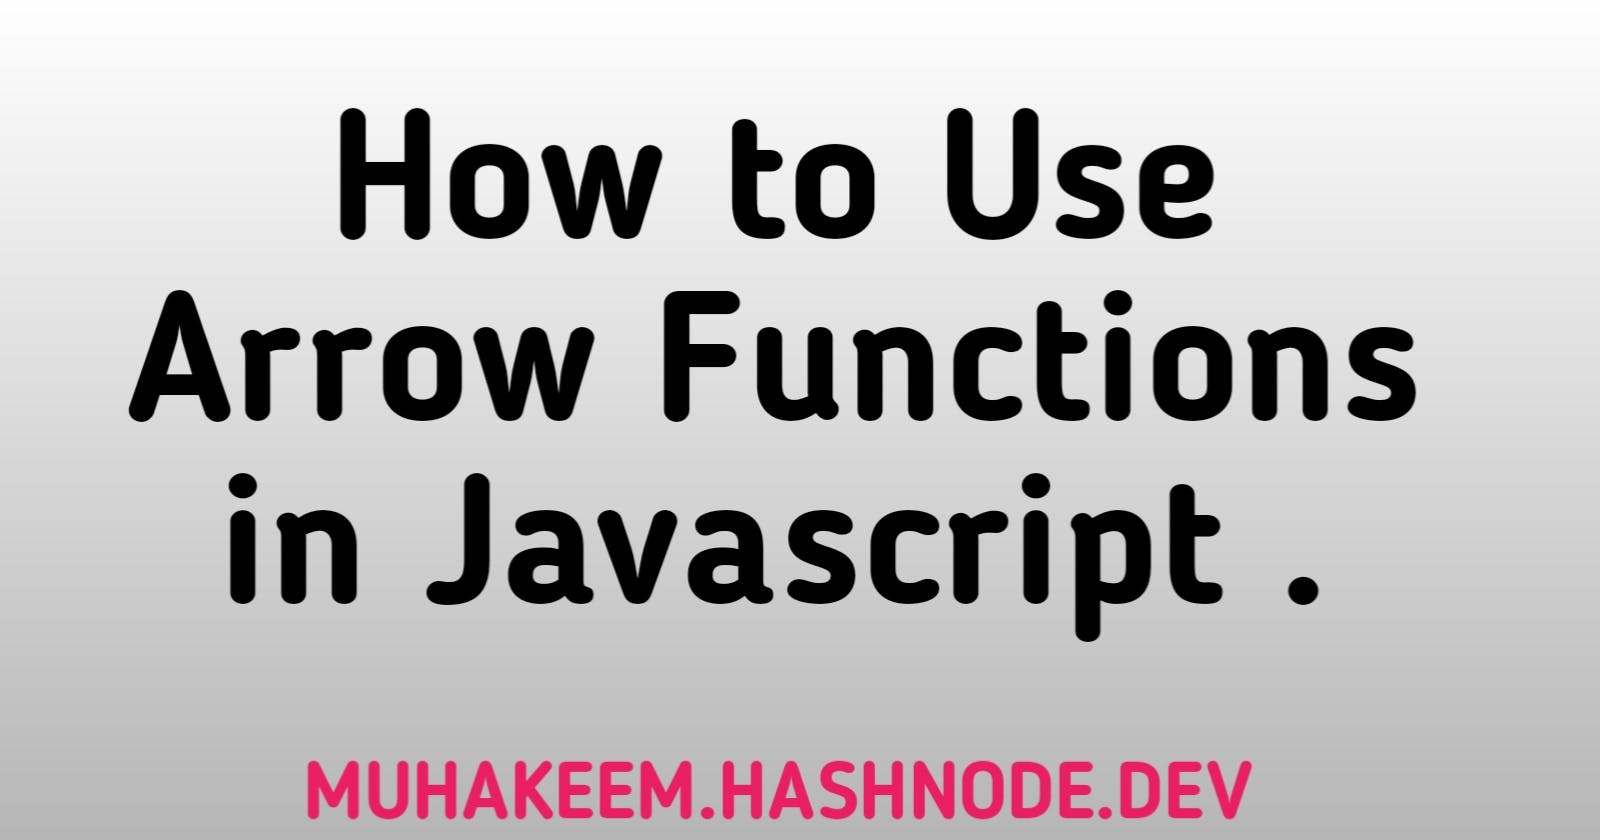 How to use Arrow Functions in Javascript